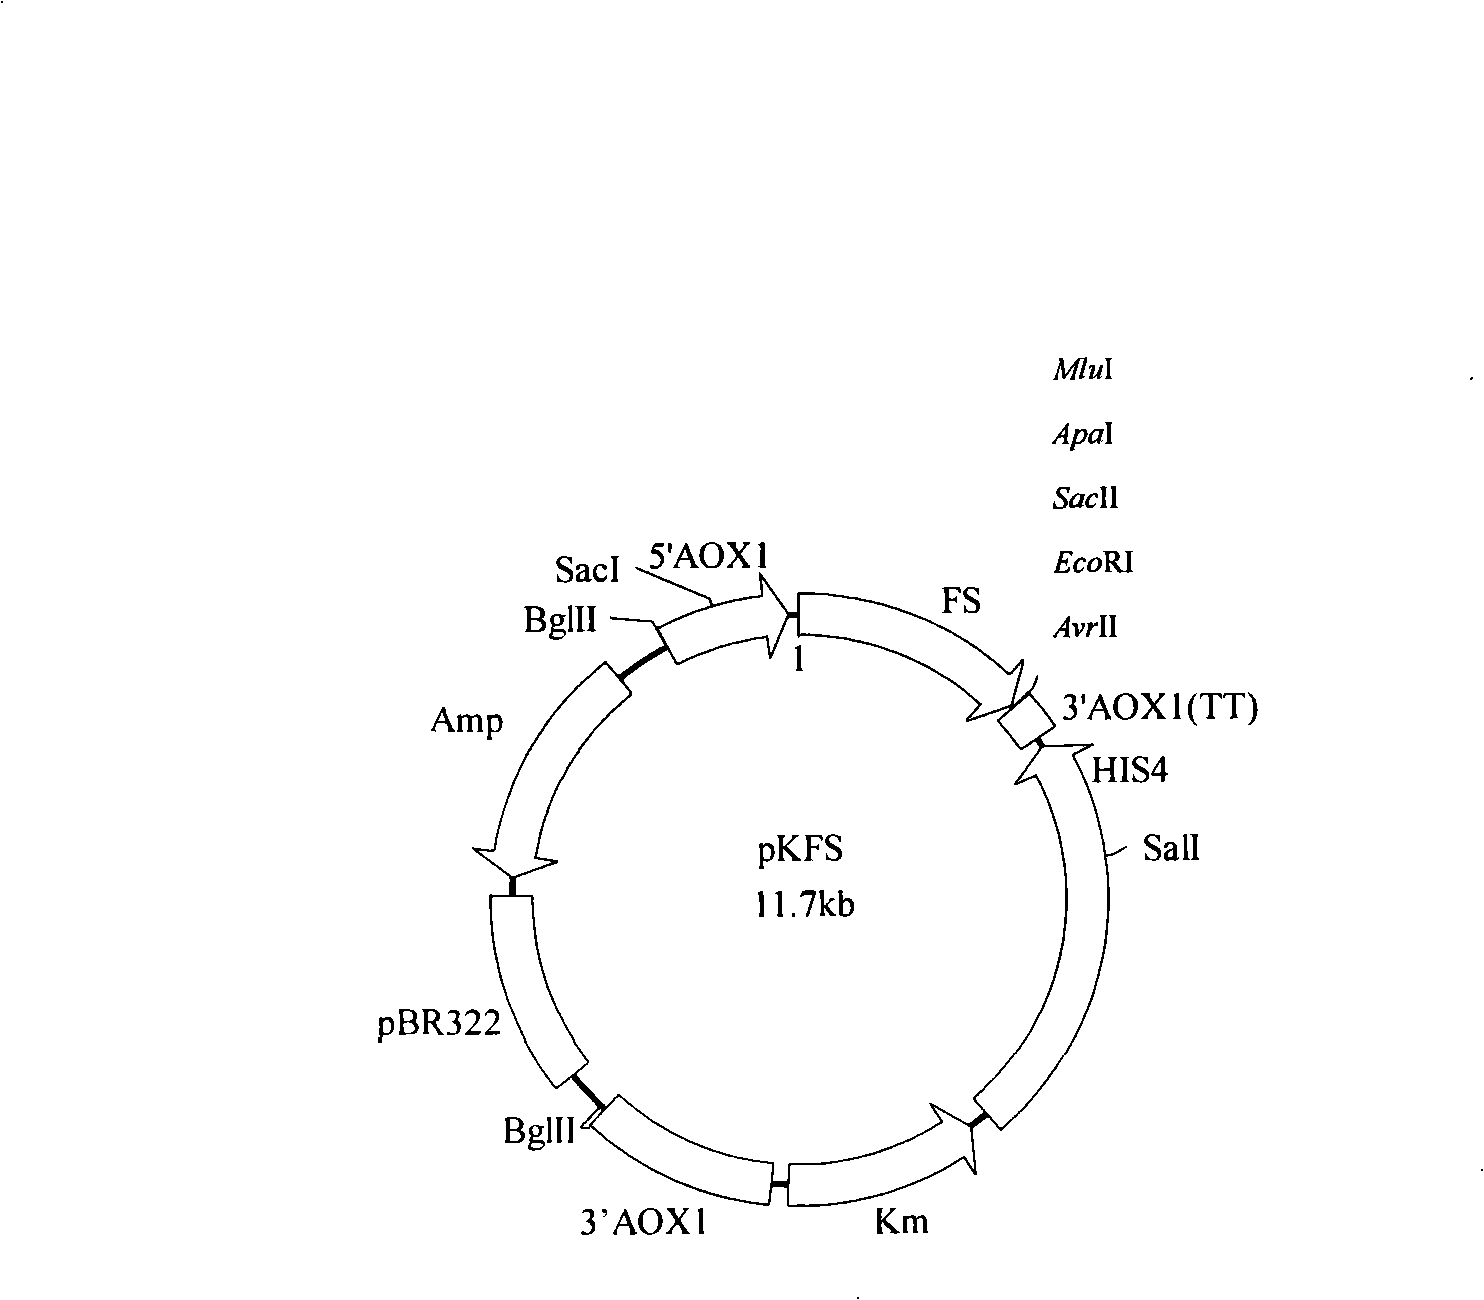 Process for synthesizing ethyl caproate by yeast display lipase synthesis